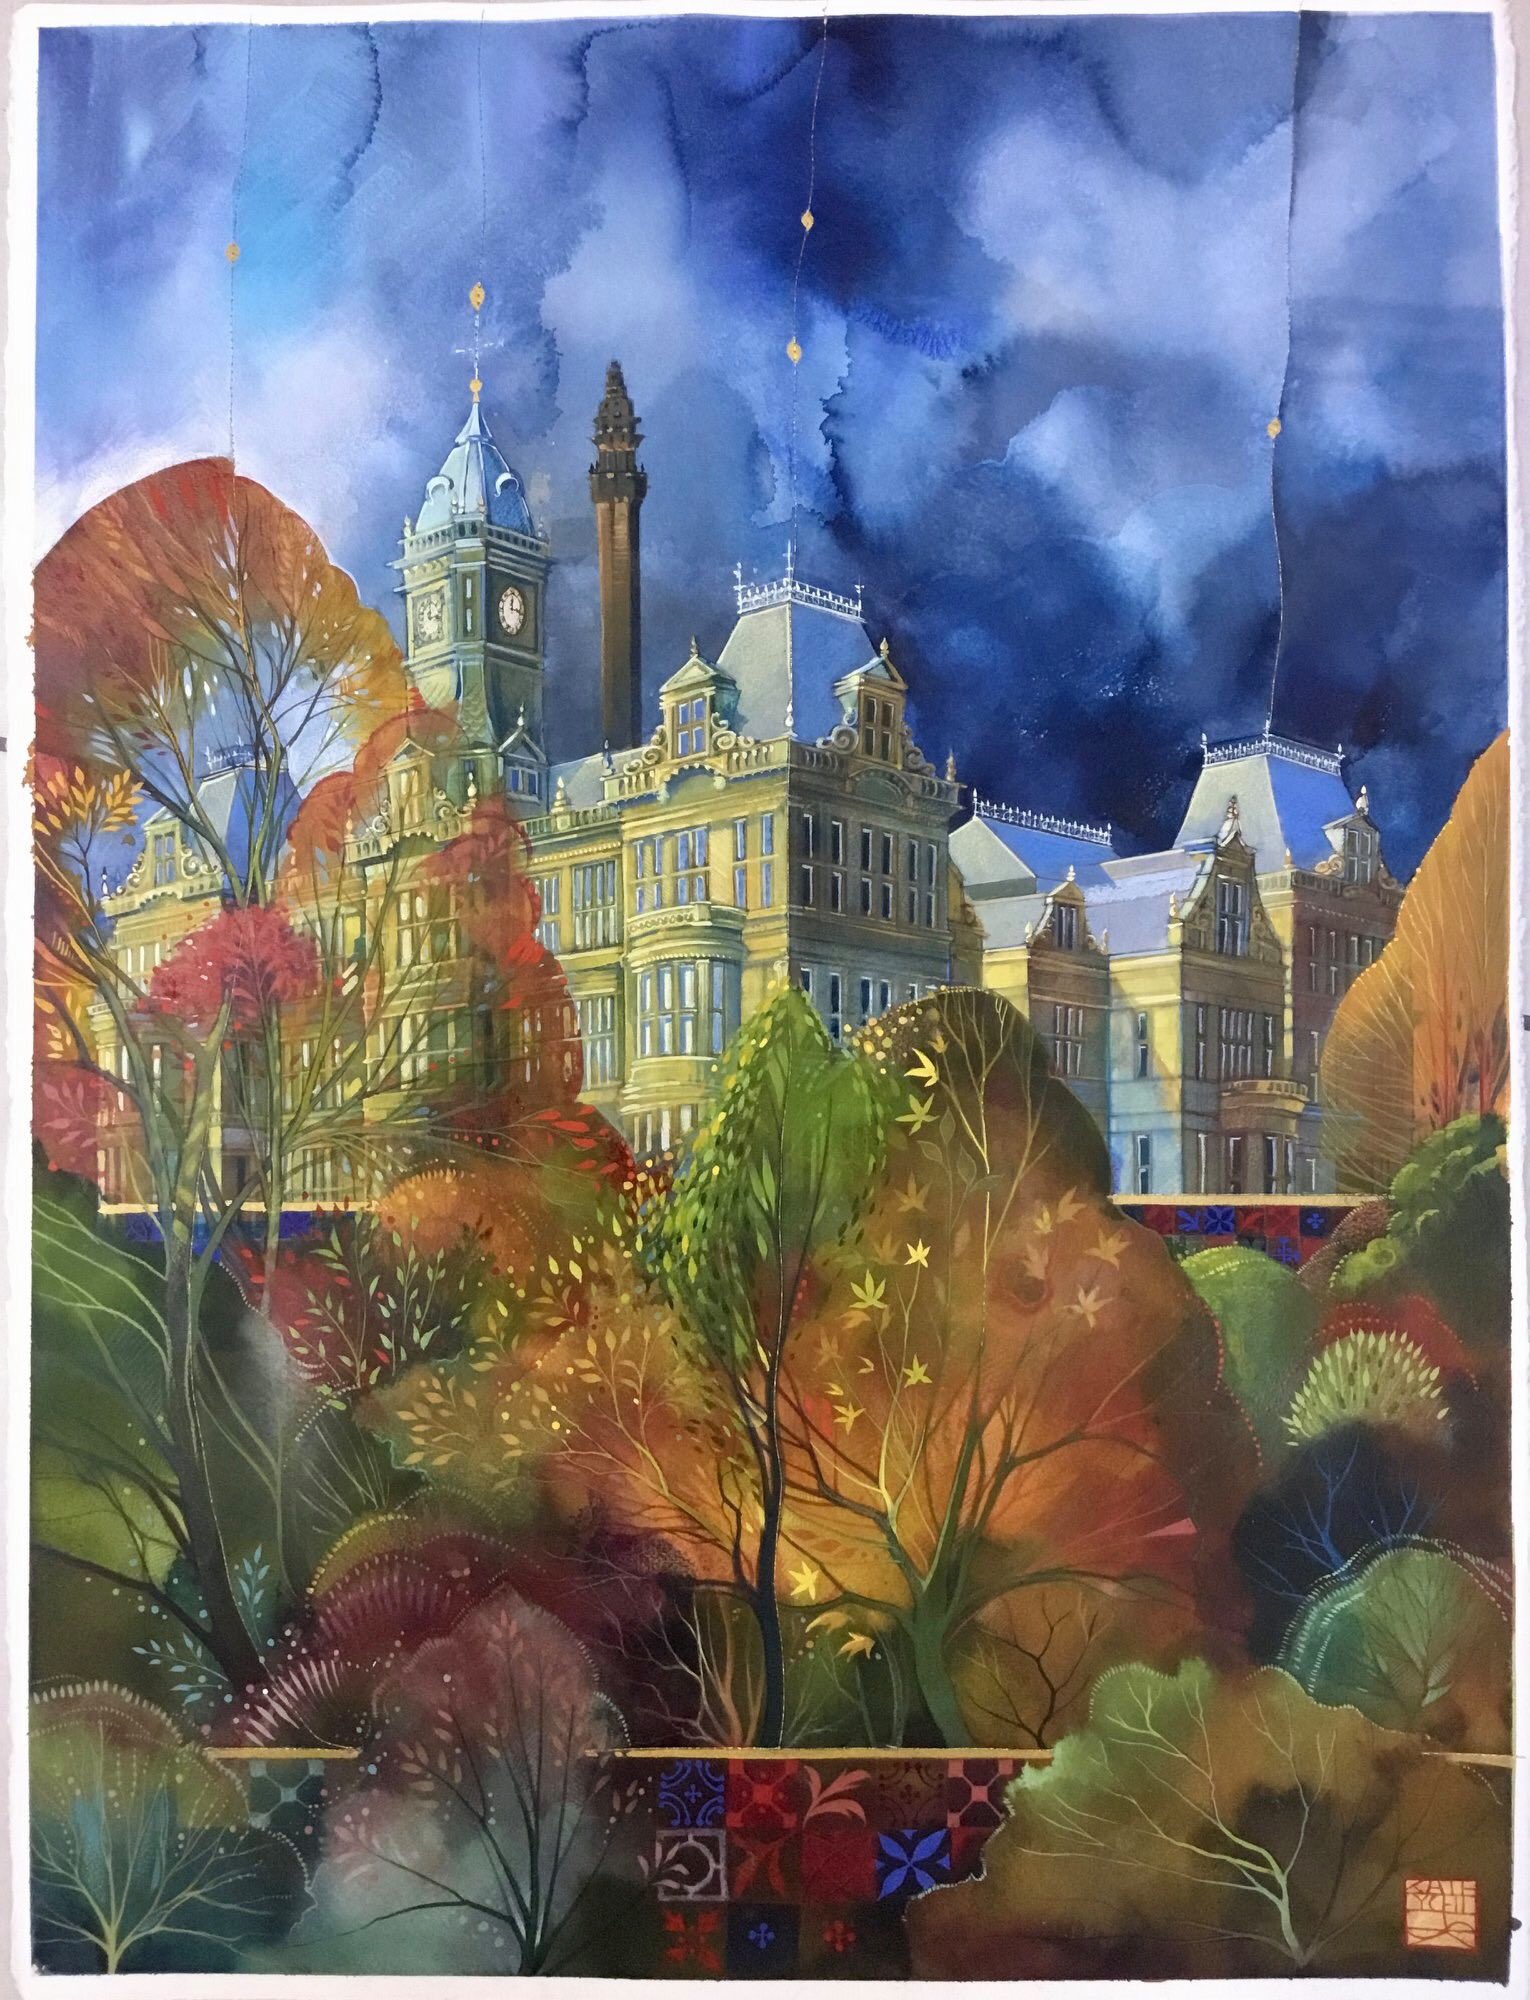 Salg undertøj Ubrugelig Crossley Heath on Twitter: "How beautiful is this? We are all missing this  building this week I think. Stunning painting by artist (and parent!) Kate  Lycett https://t.co/6XHwd76I60 https://t.co/vv3IWTkR0Y" / Twitter